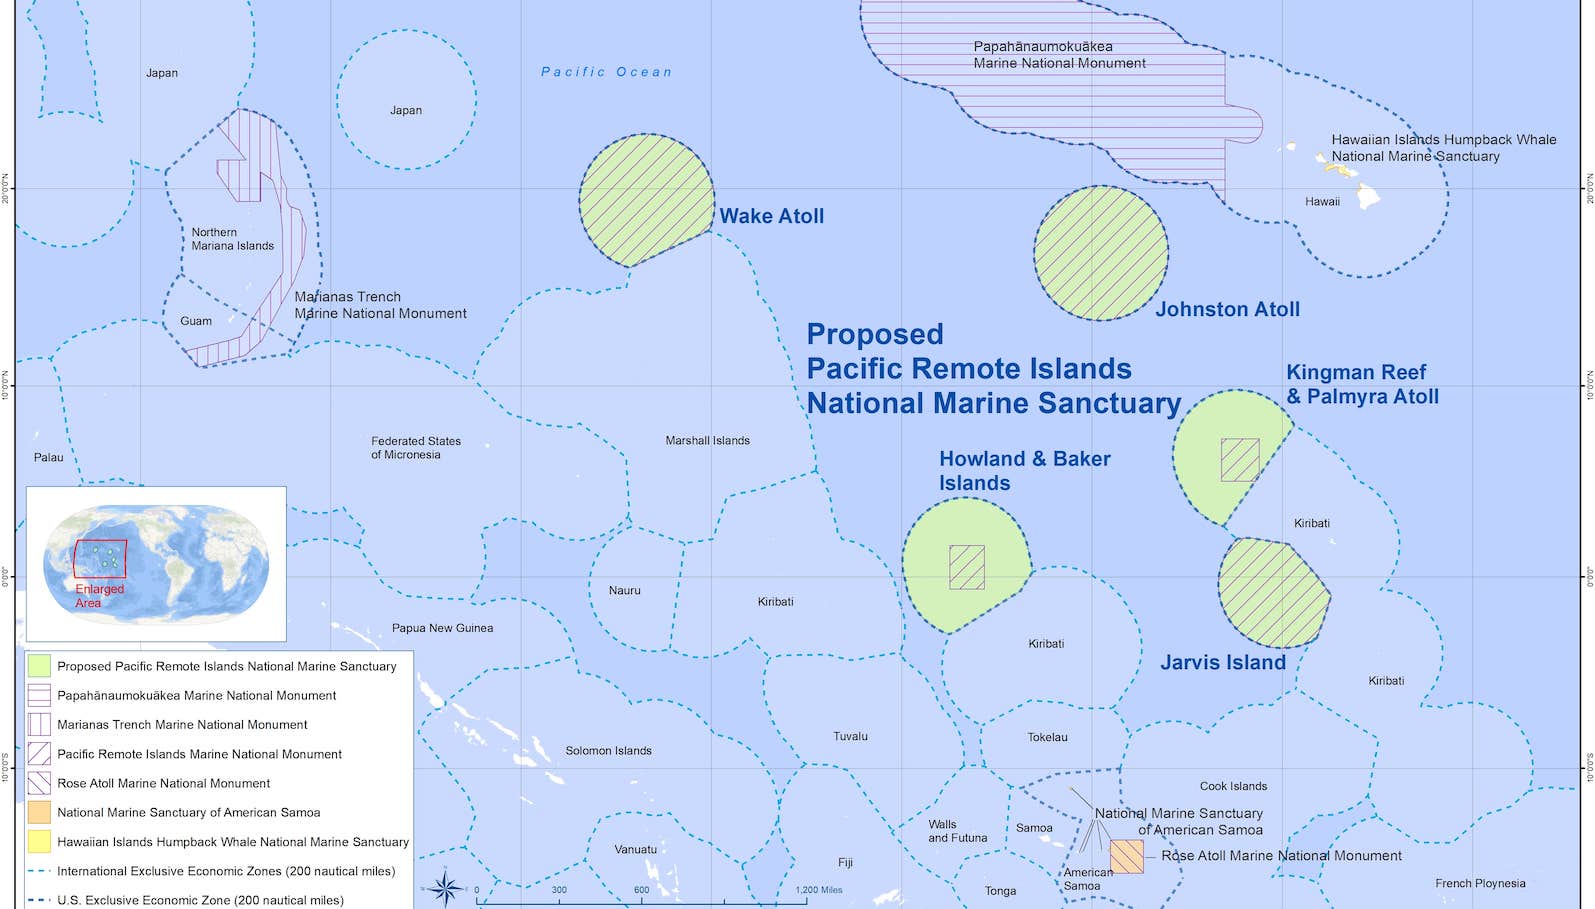 This is a map of the proposed Pacific Remote Islands National Marine Sanctuary.